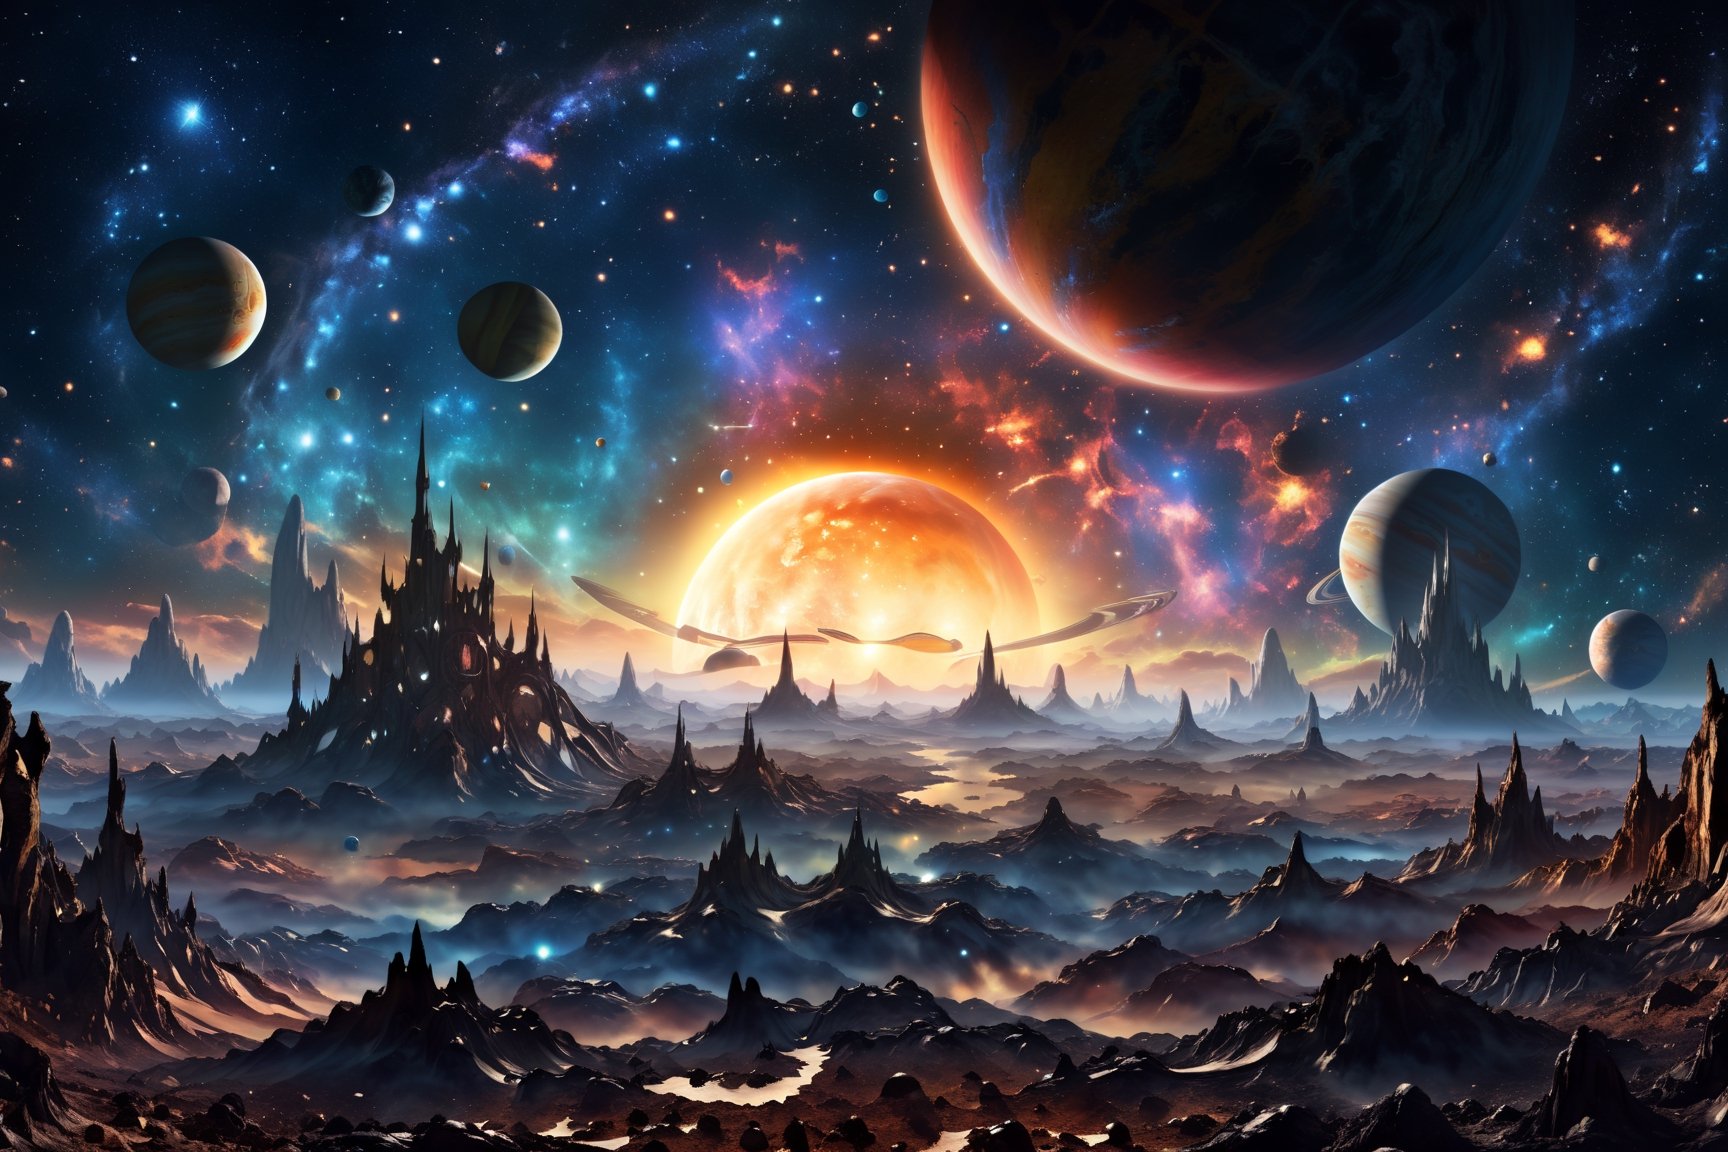 A magical landscape from another world full of beauty and magic, planets seen in the distance of a stary sky,